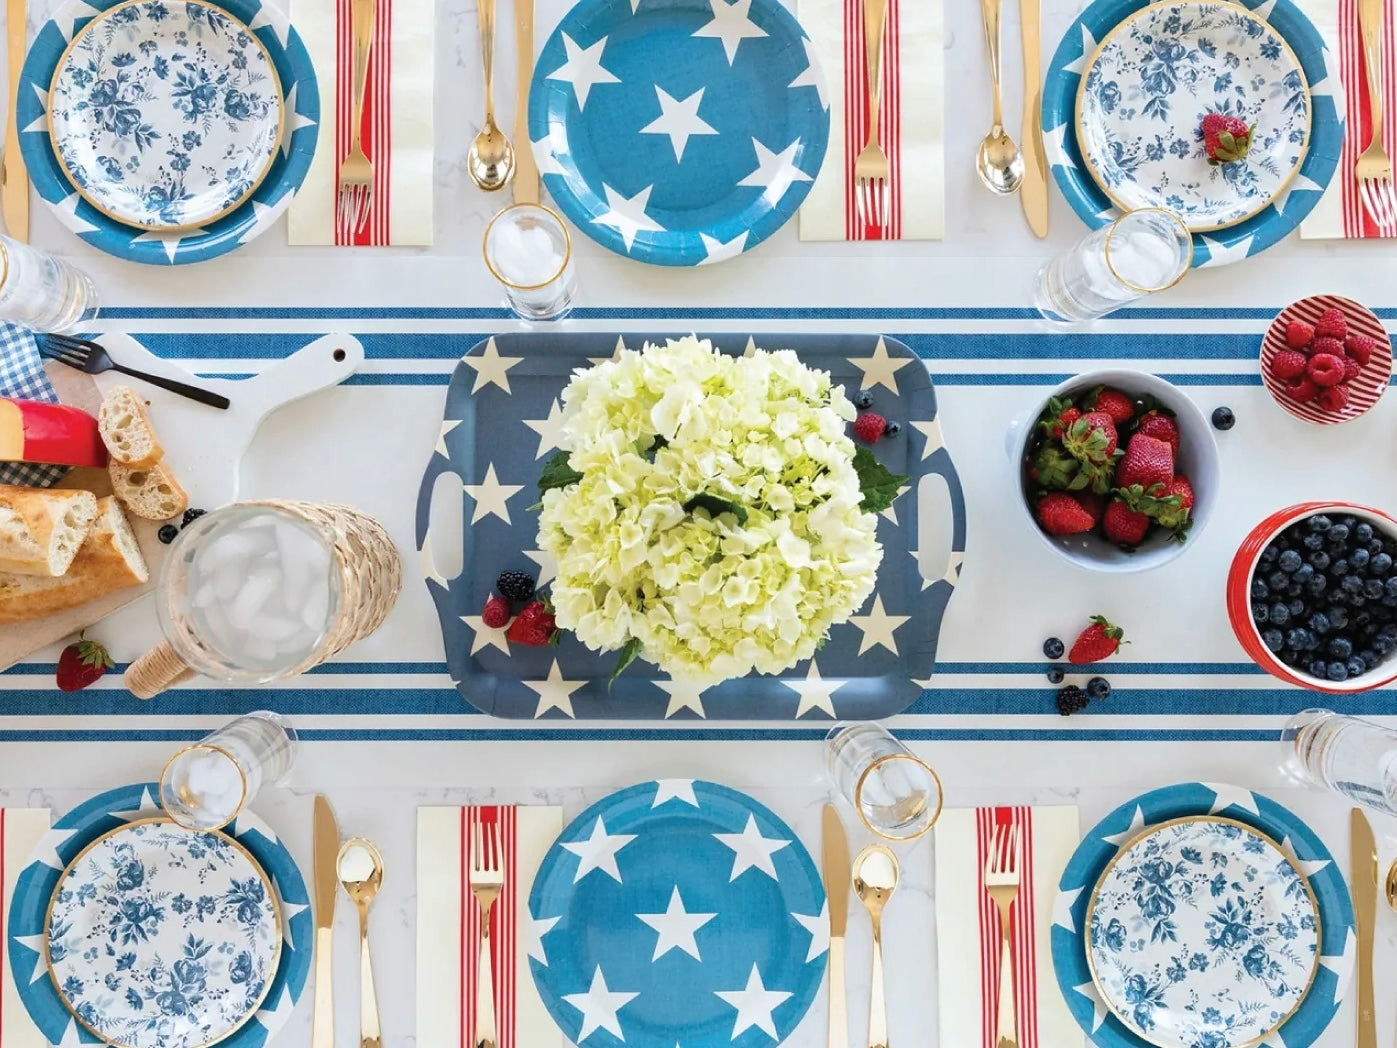 7 Popular Summer Party Themes & Decoration Ideas | The Party Darling